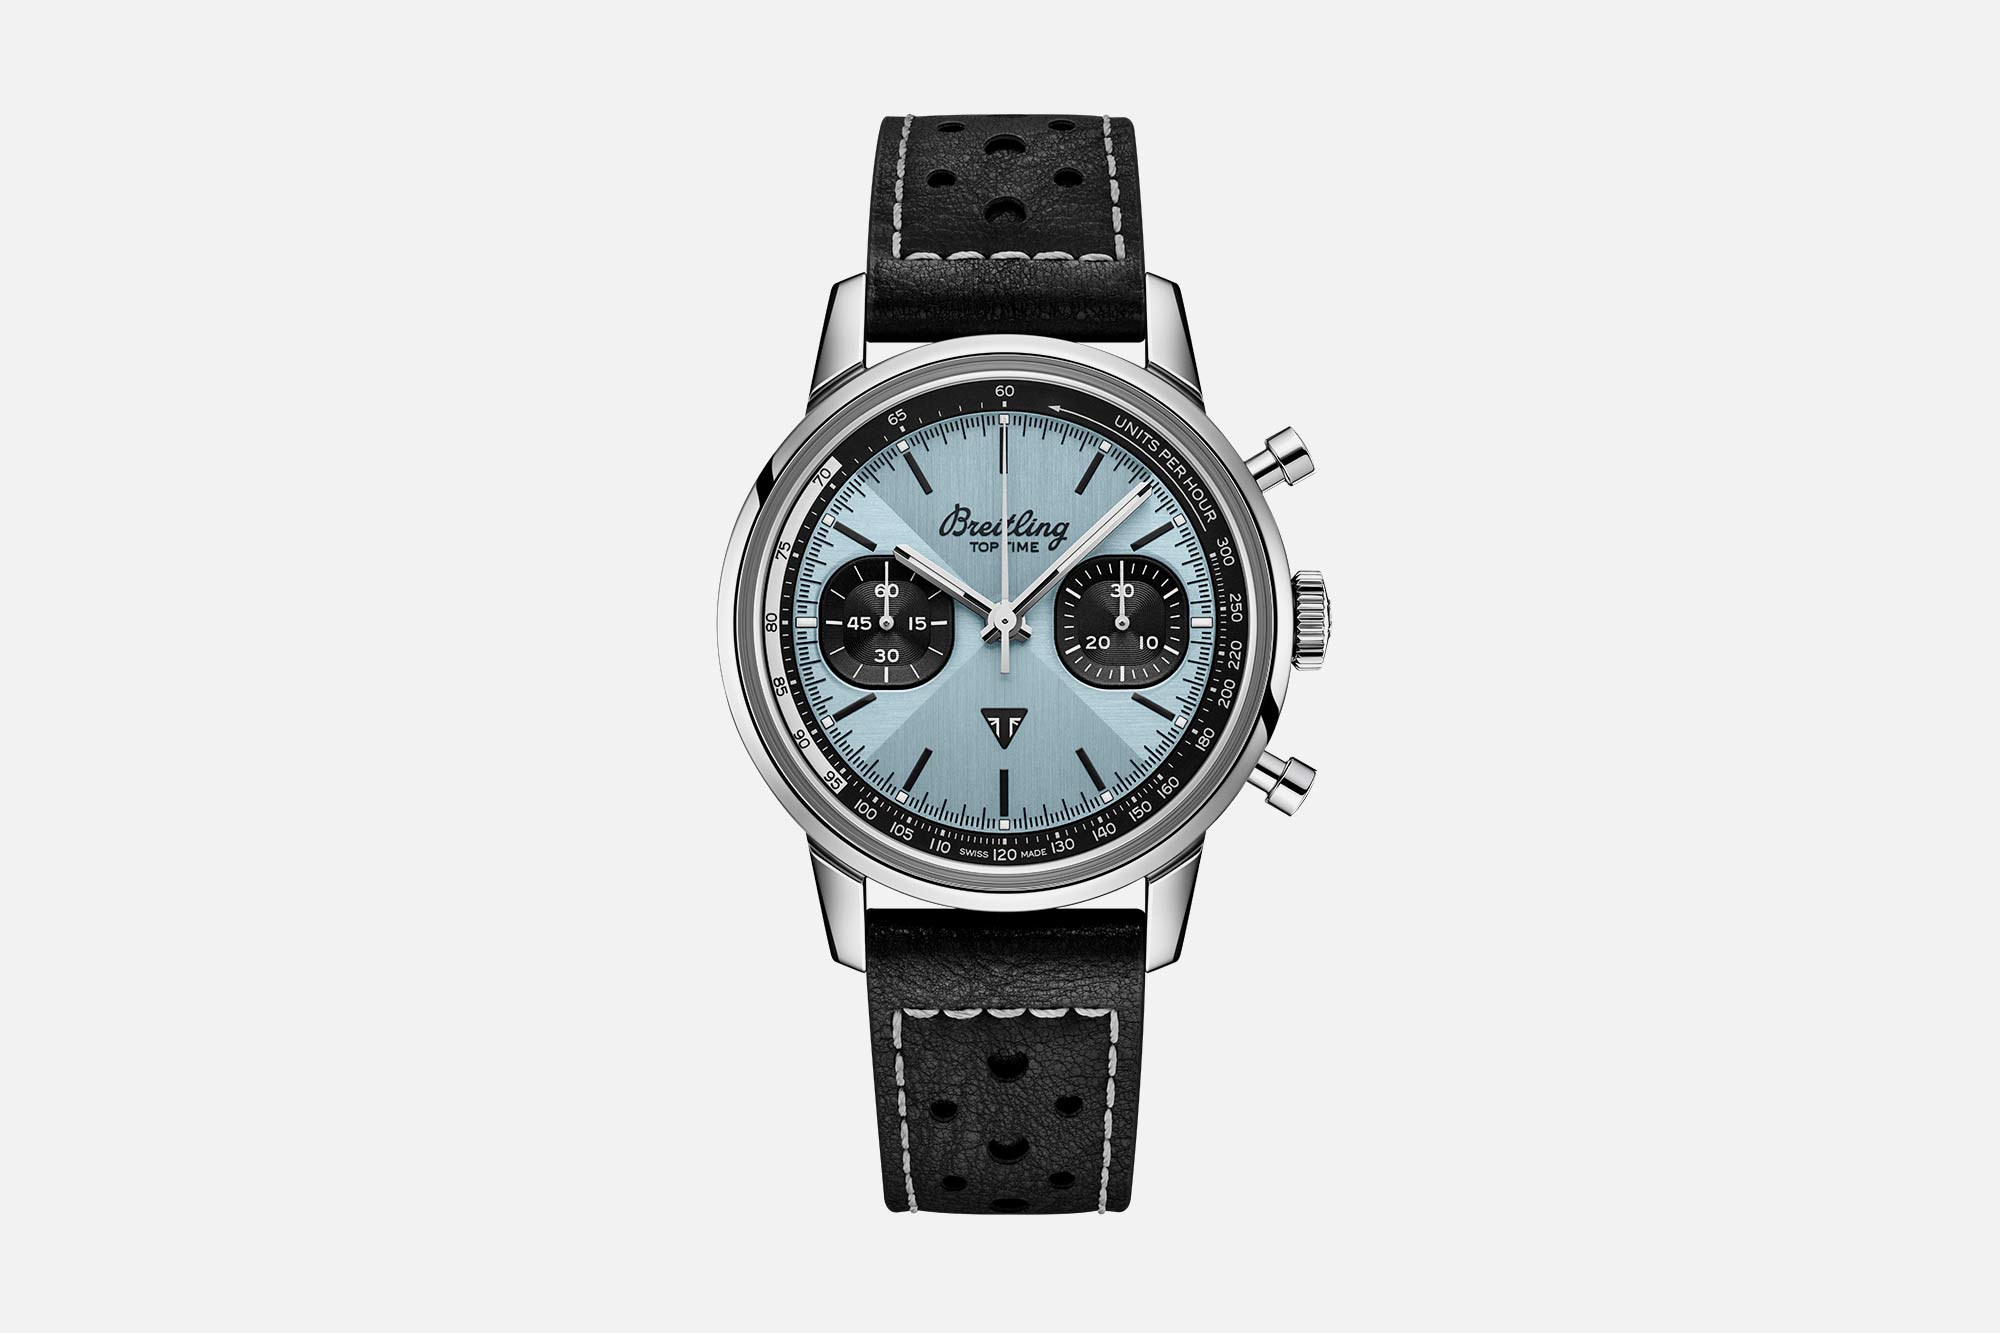 Breitling Releases a New Ice Blue Top Time in Collaboration with Triumph